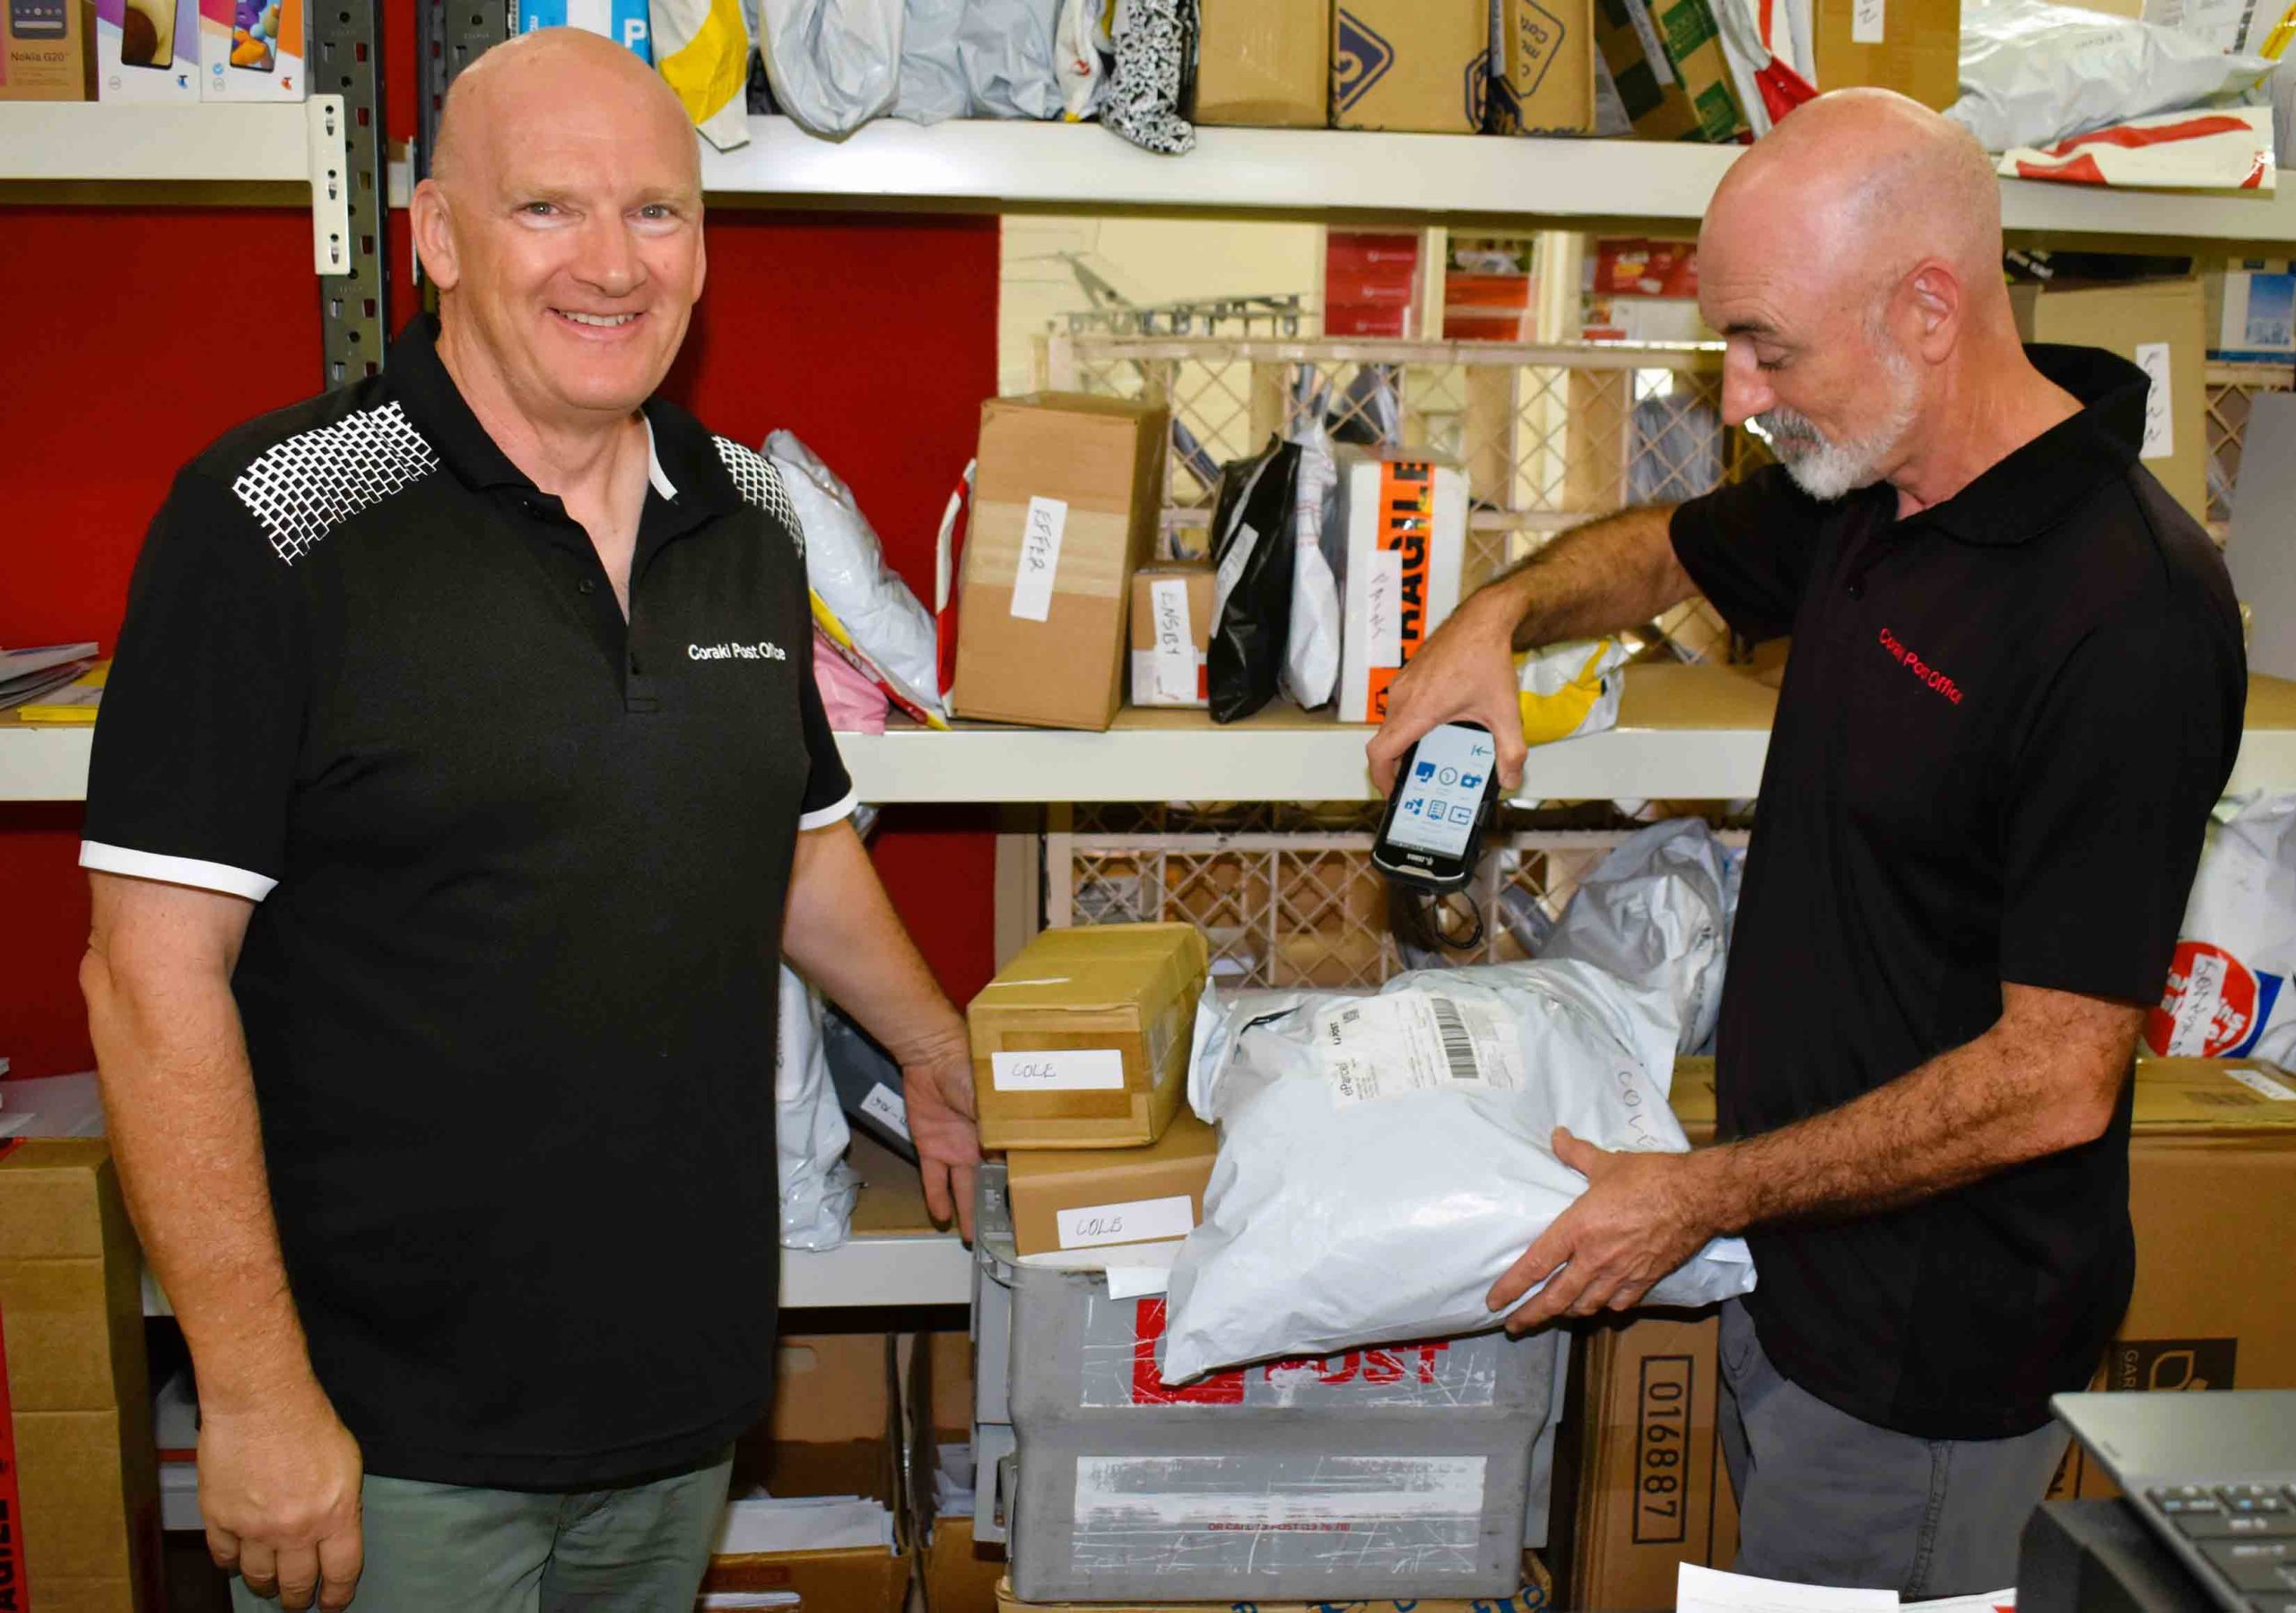 Saving the ‘brain’ of flooded post office – Richmond Valley and Kyogle news